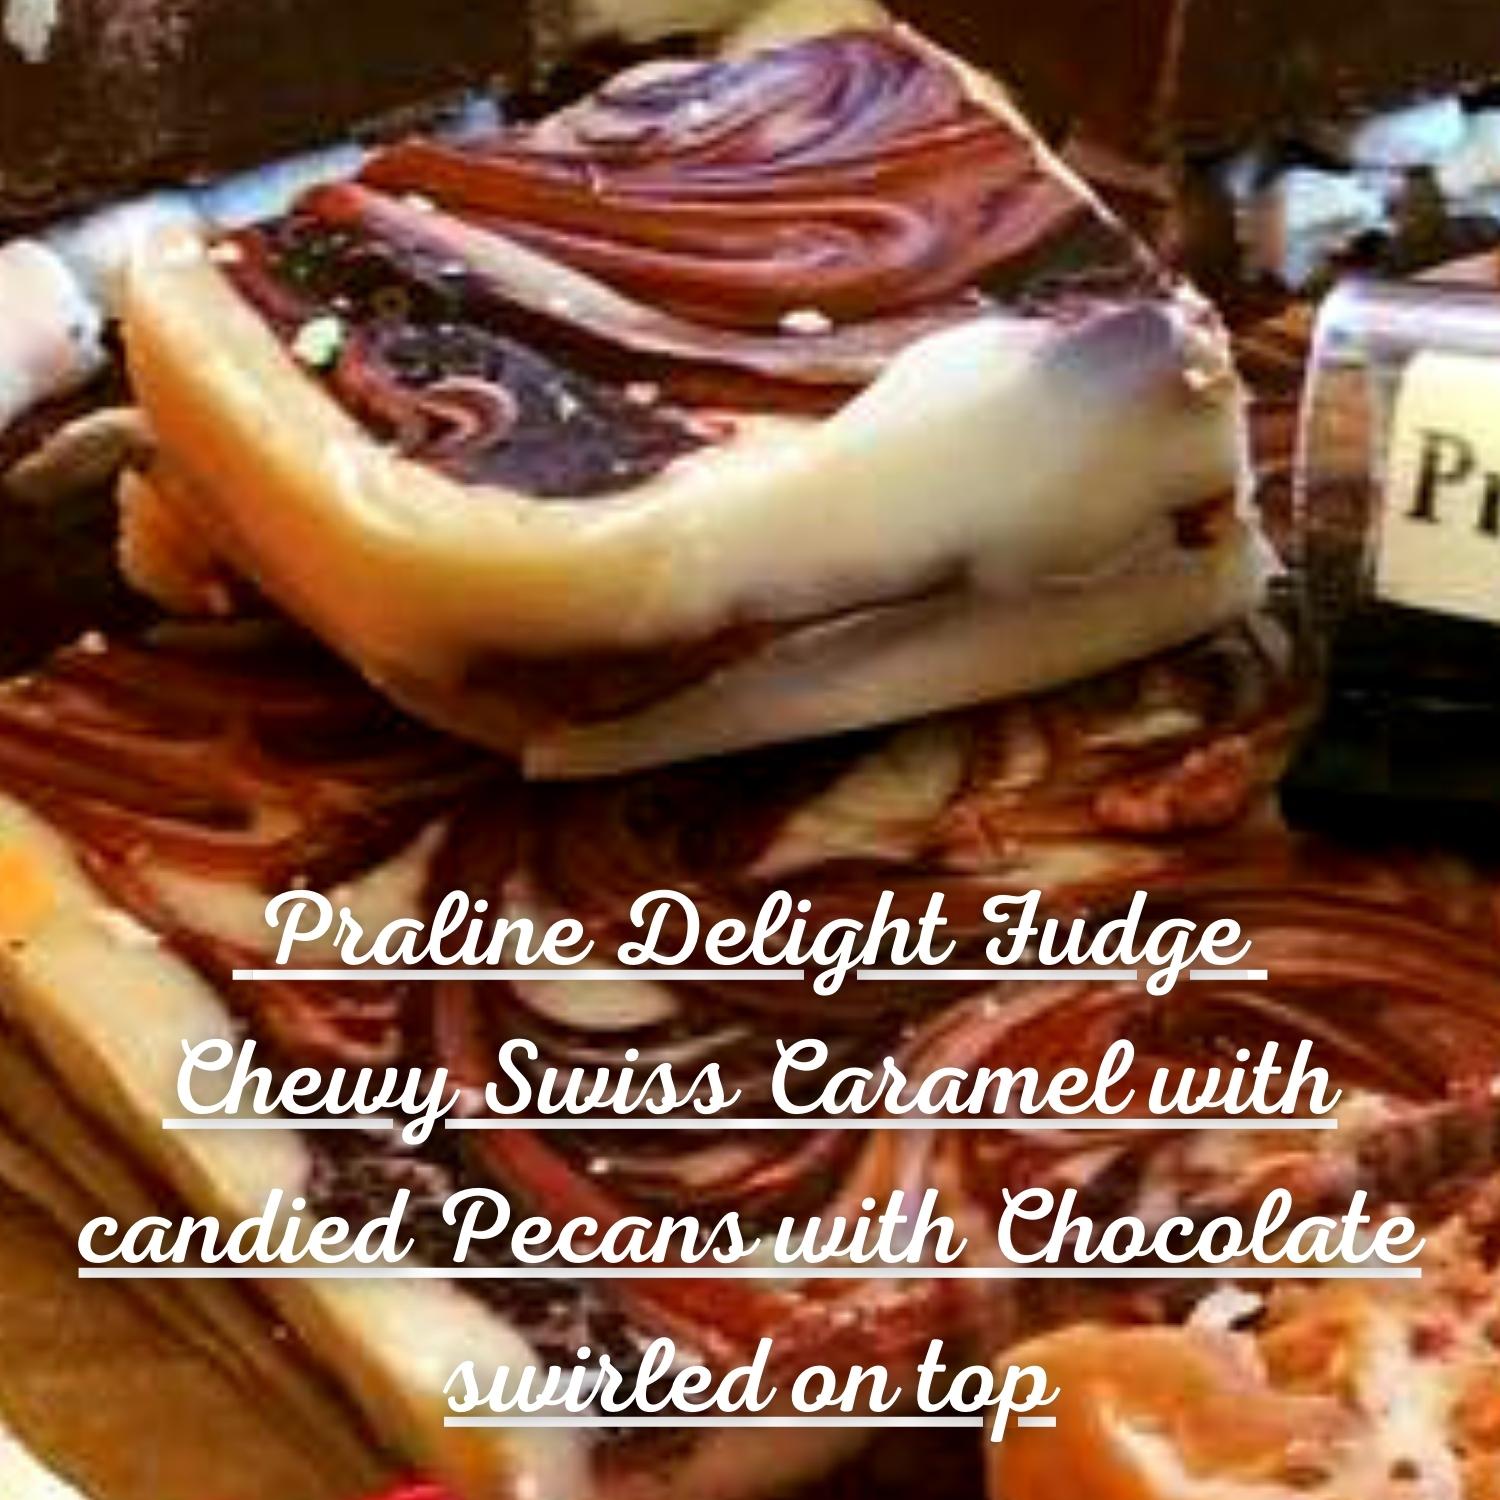 Praline Delight Fudge Chewy Swiss Caramel with candied Pecans with Chocolate swirled on top